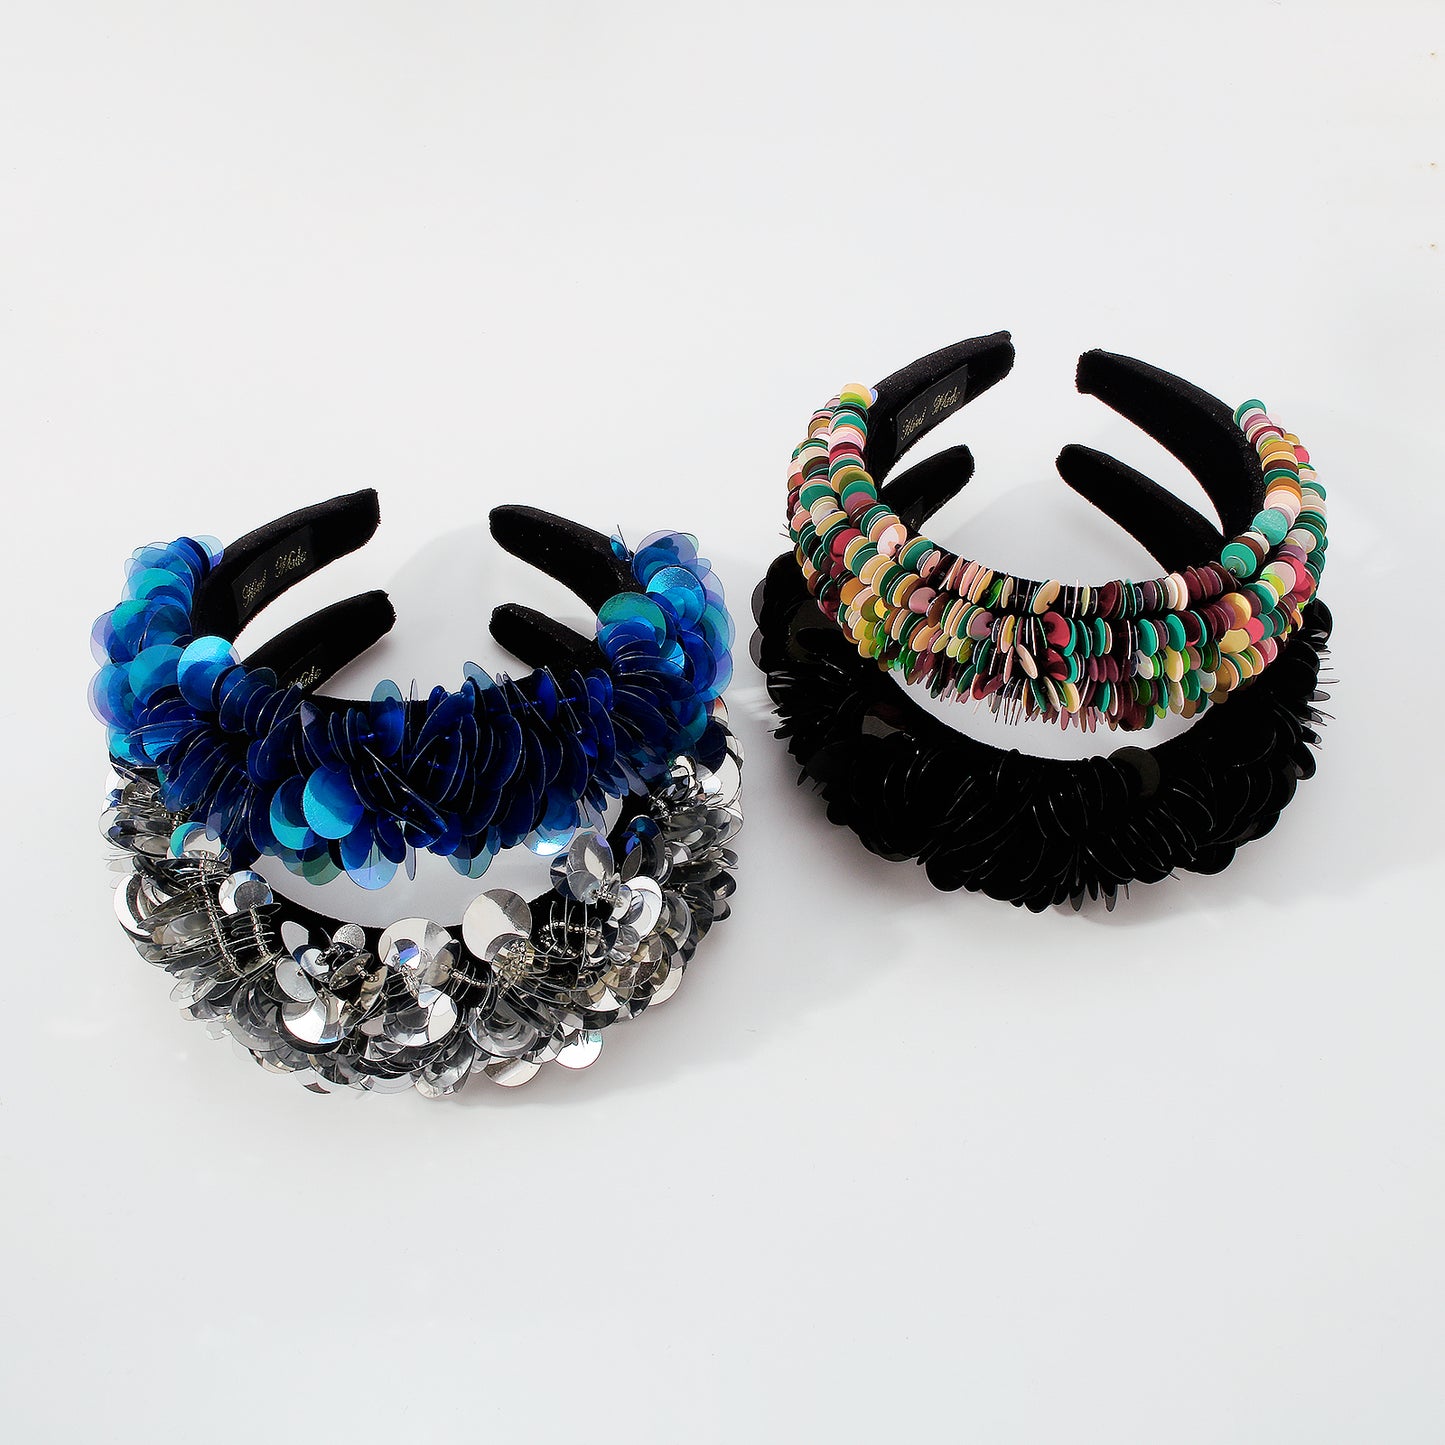 Large Sequin Sparkly Padded Headbands medyjewelry